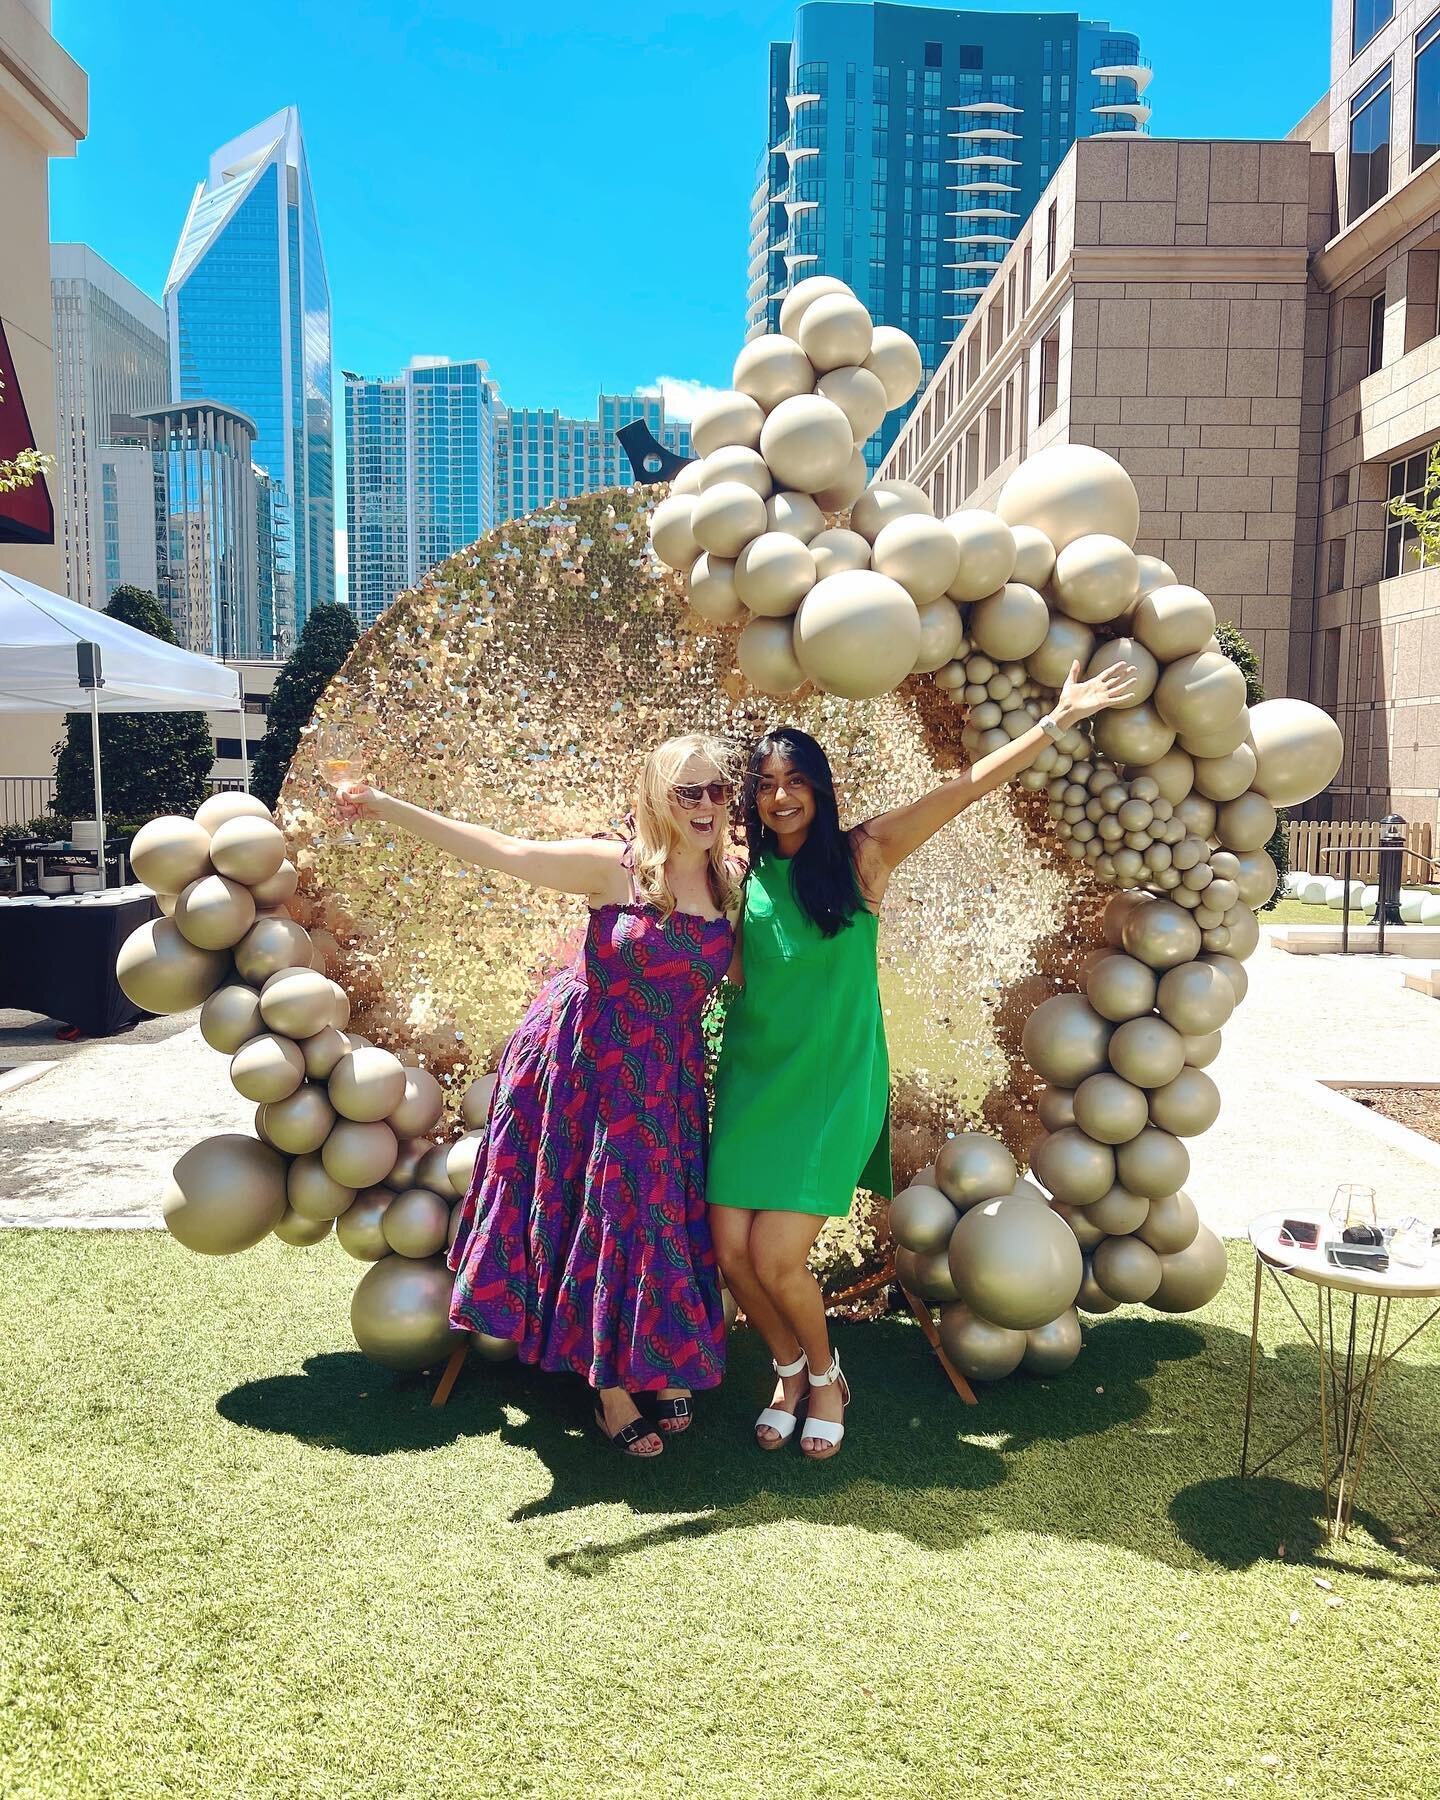 Celebrating another great @cltwineandfood Week in the books. Meet my newest #sidekick and #partnerincrime @shreyagangaram. So proud of how she rose to the occasion this week! Thanks to @alldaysoireeclt for this fun photo backdrop at our Sunday bubble